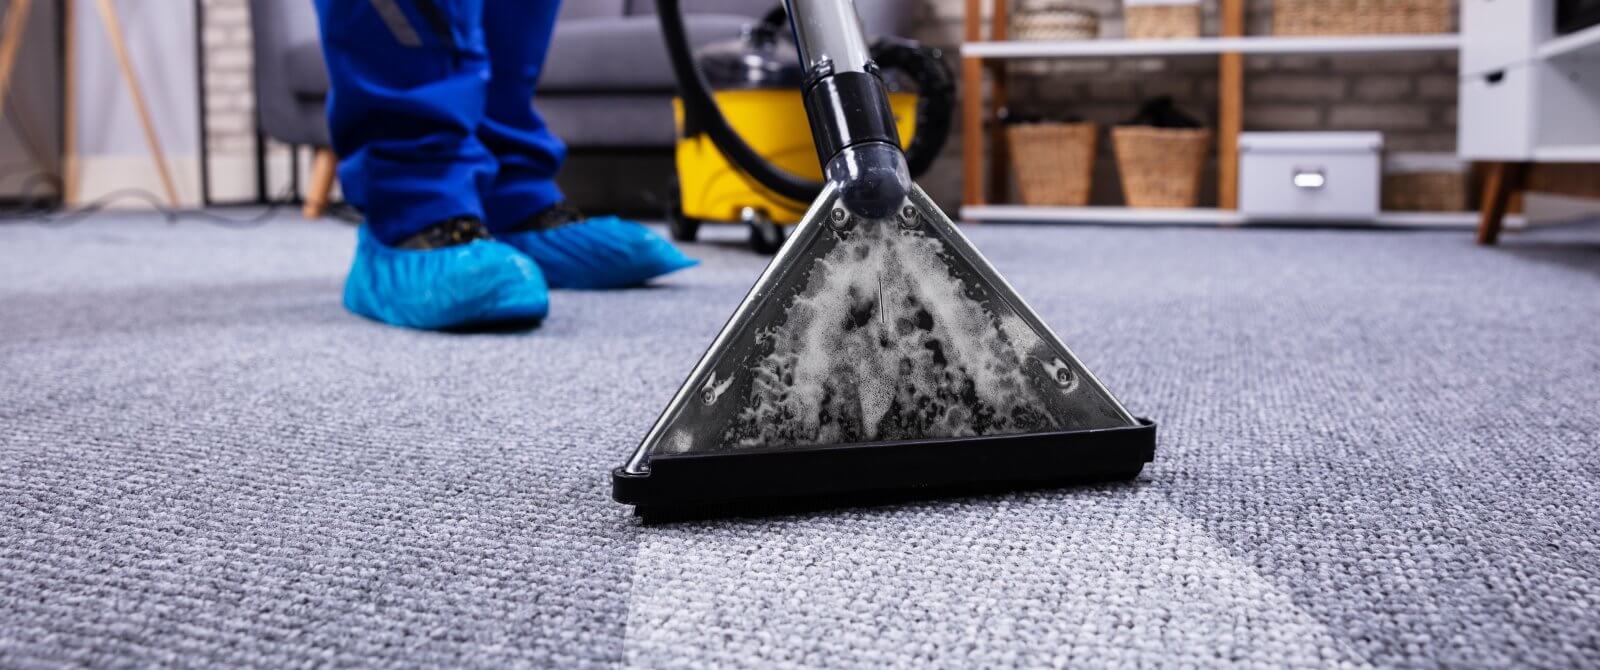 Carpet Cleaning Cannock